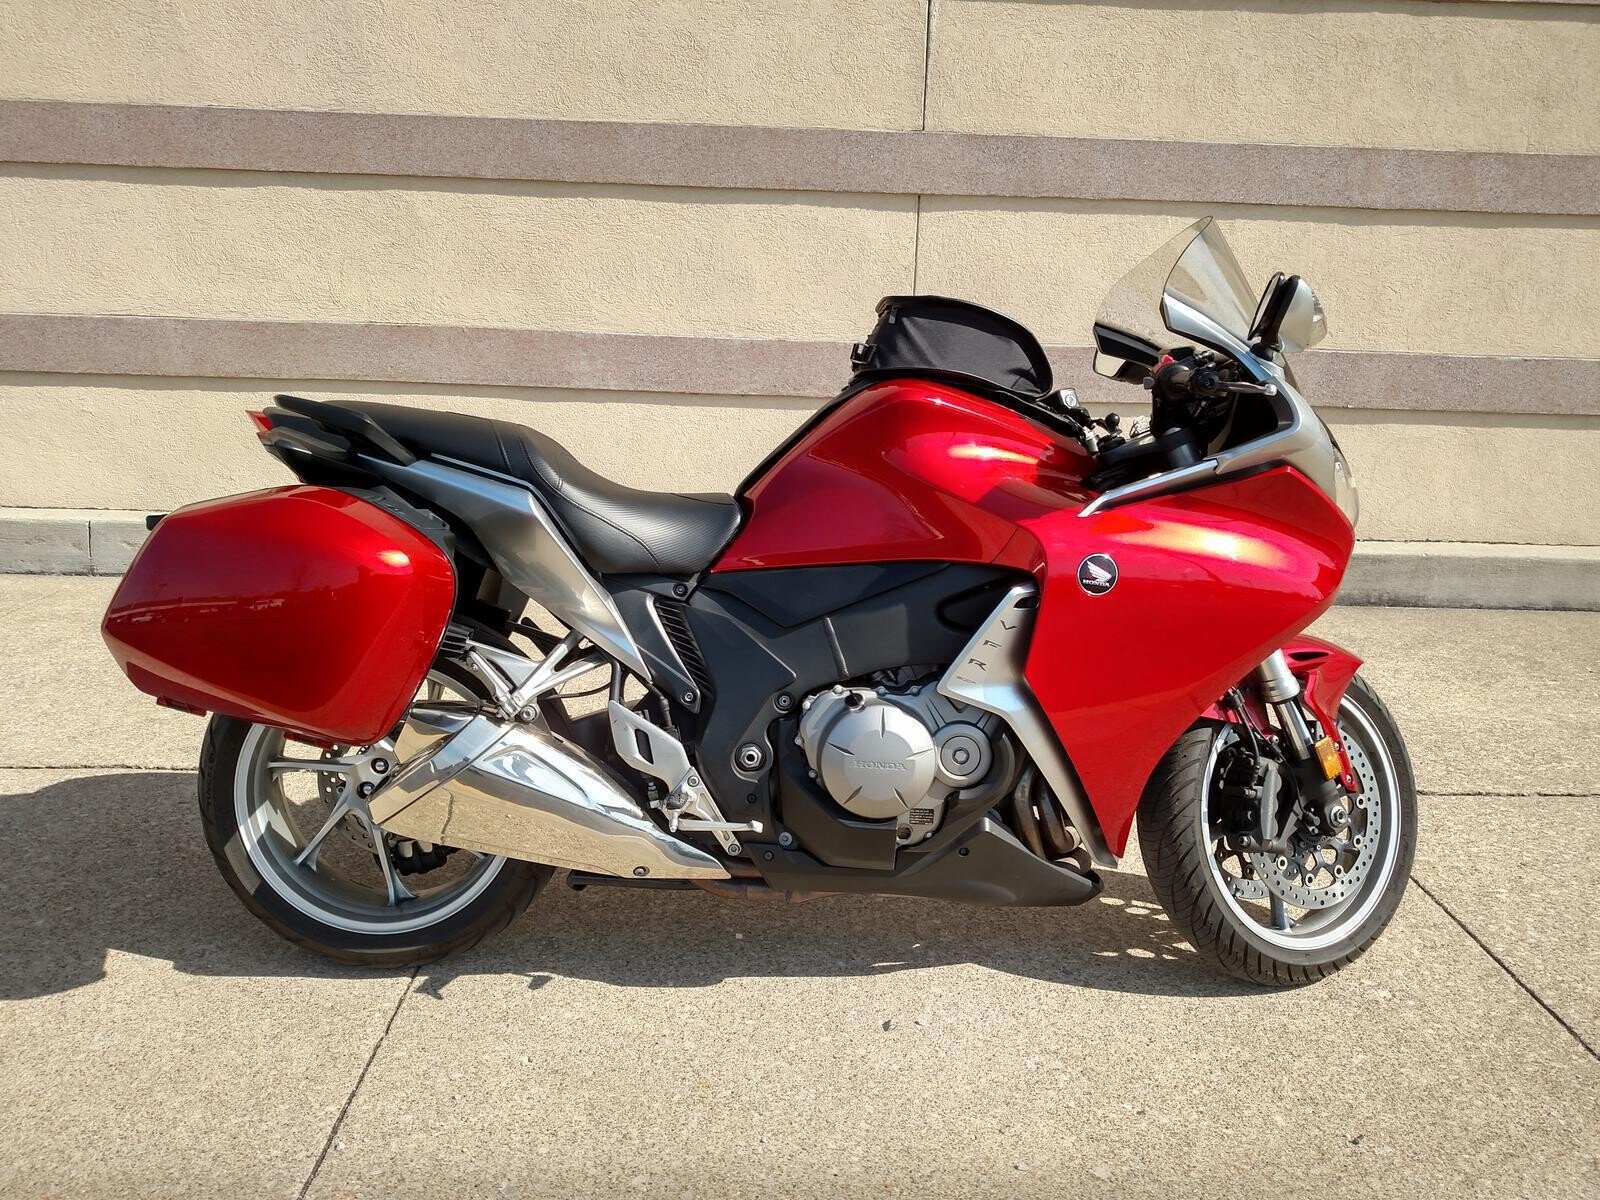 Honda VFR1200F Motorcycles for Sale Motorcycles on